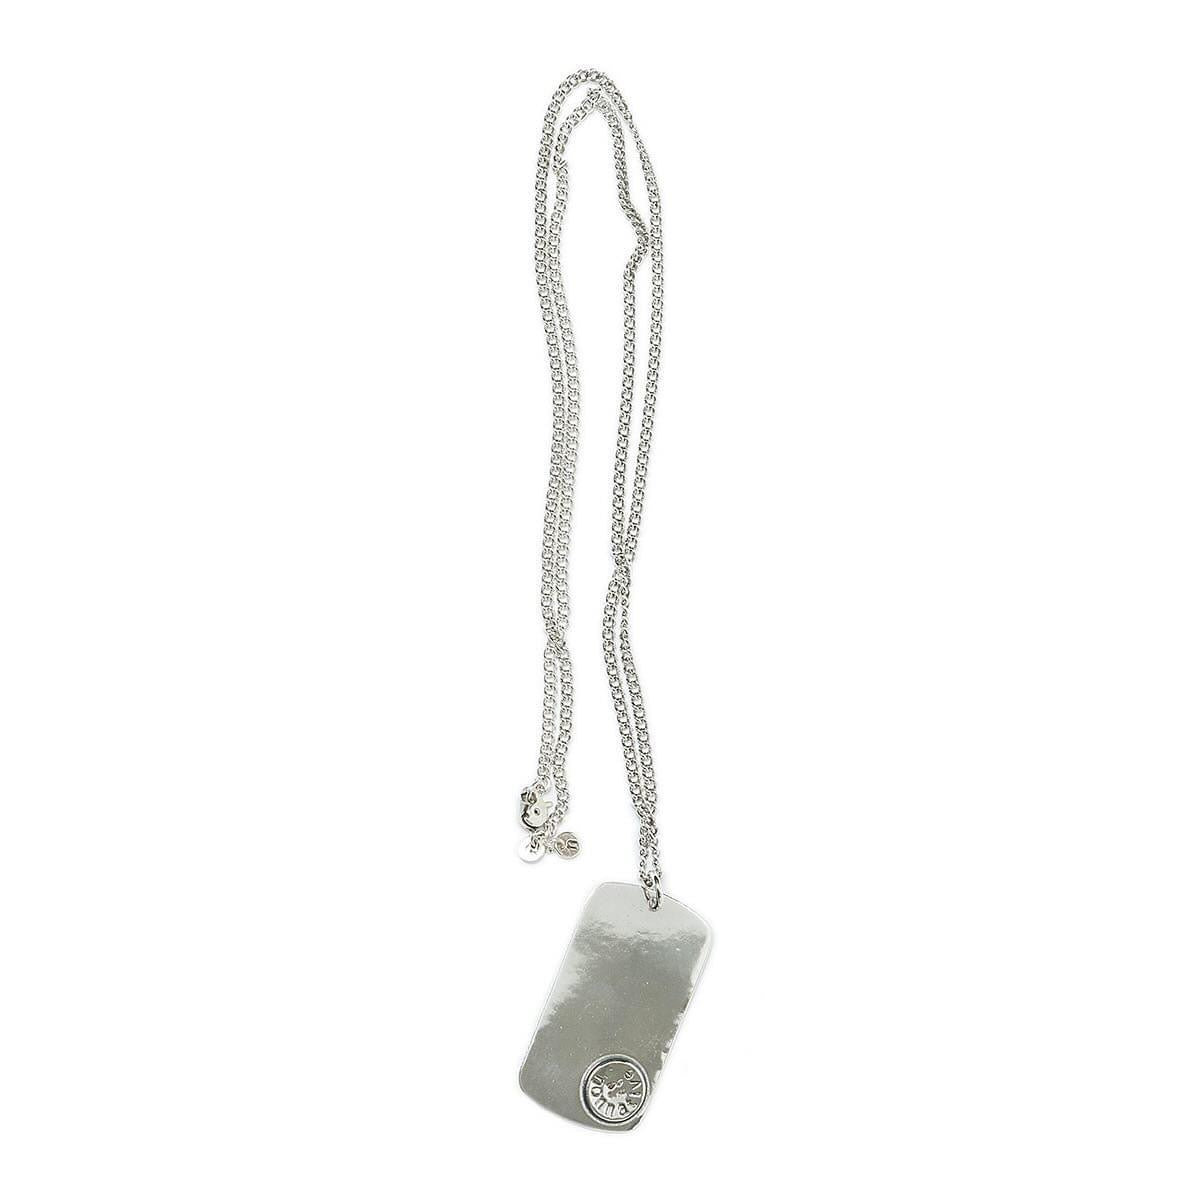 nonnative 24SS TROOPER NECKLACE "ID TAG" 925 SILVER by END